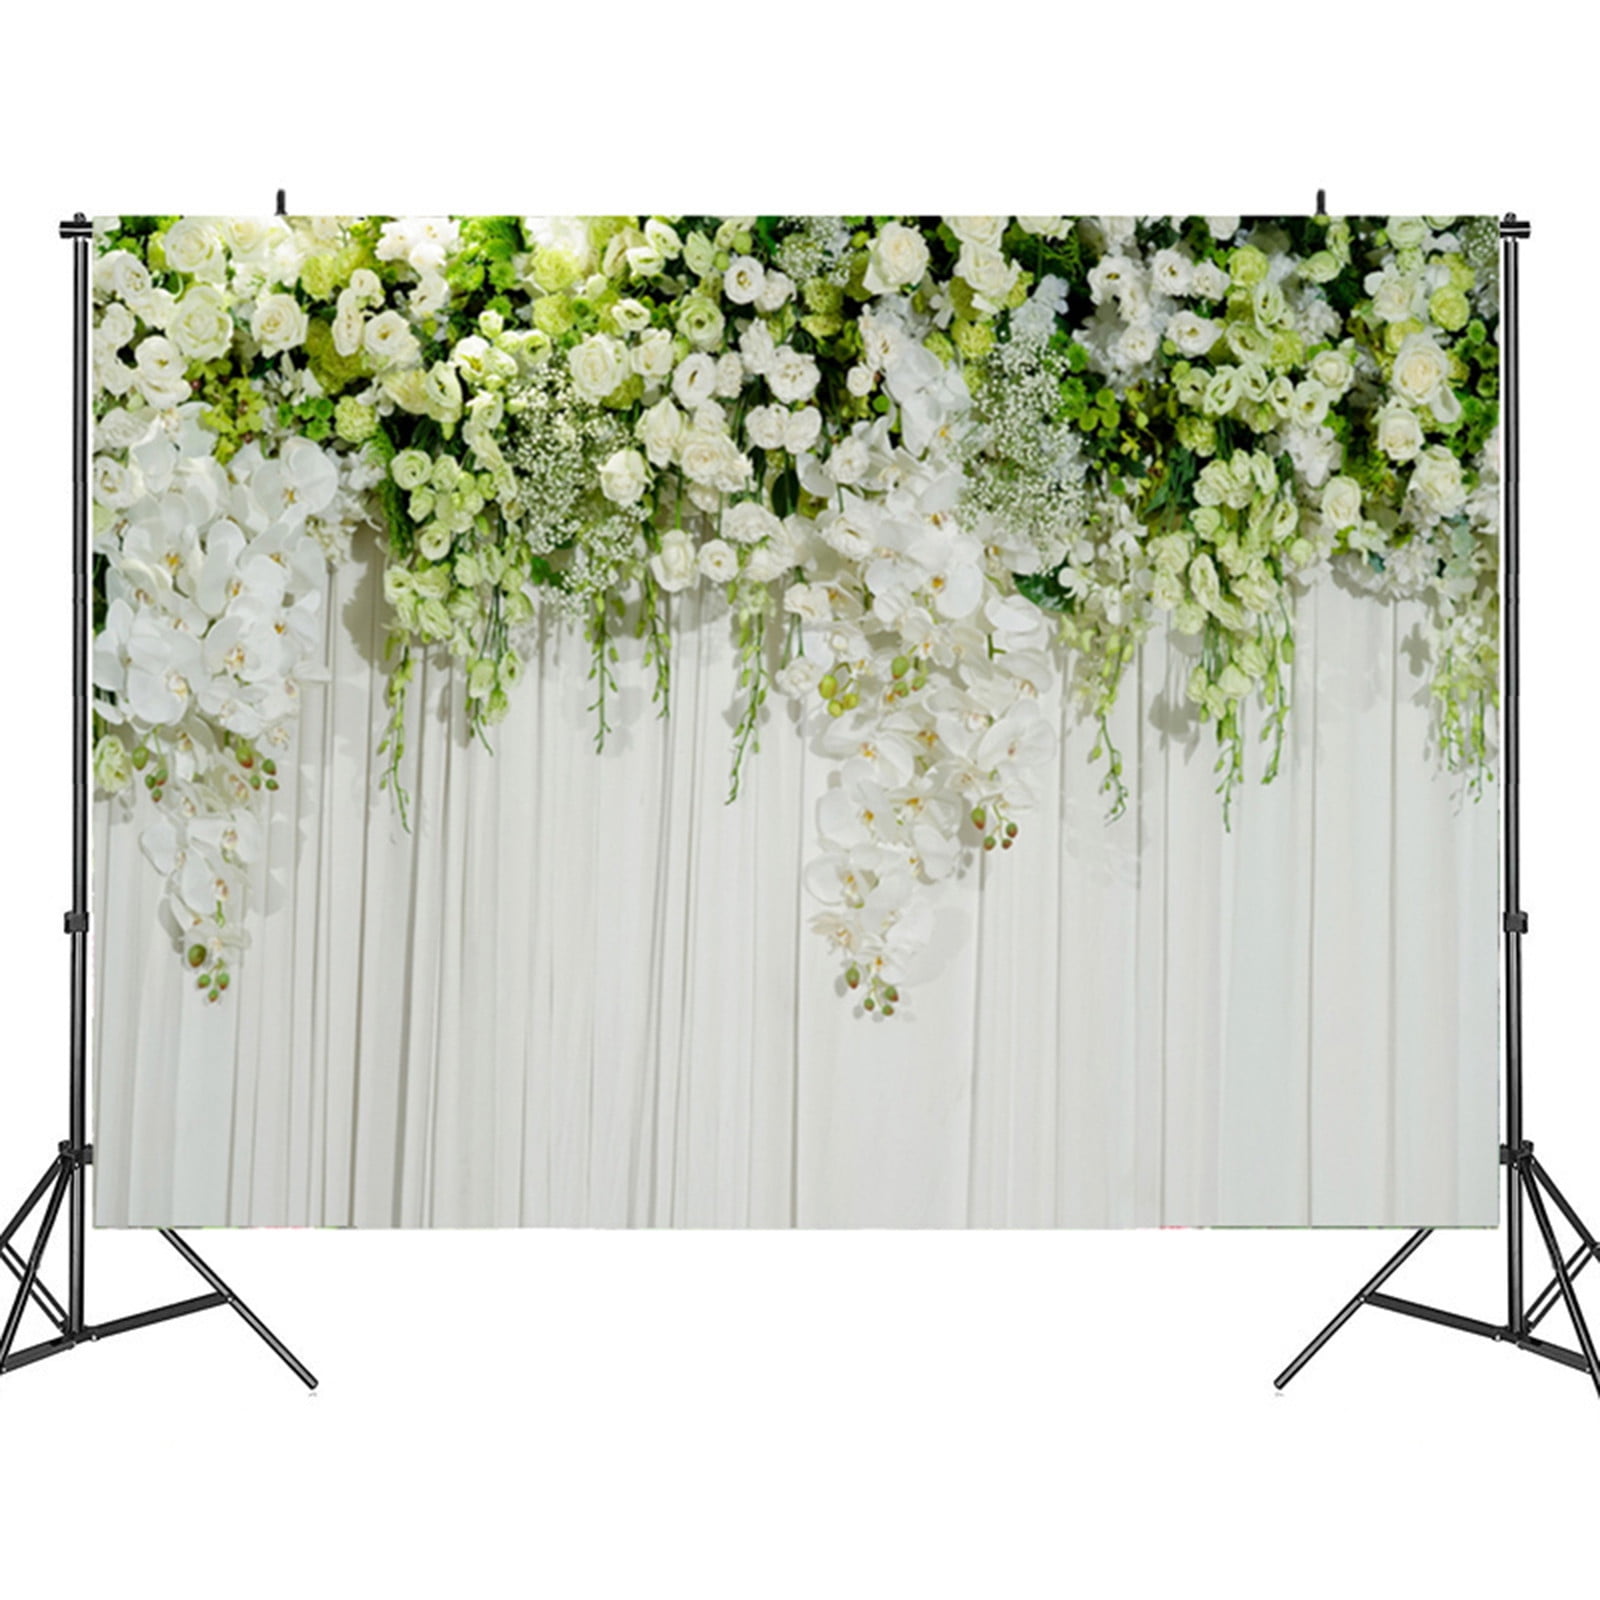 KYTVOLON Arch Backdrop Stand,10x20FT Heavy Duty Professional Backdrop Stand  for Parties,Square Wedding Metal Arch Frame,Durable and Non Stretchable 